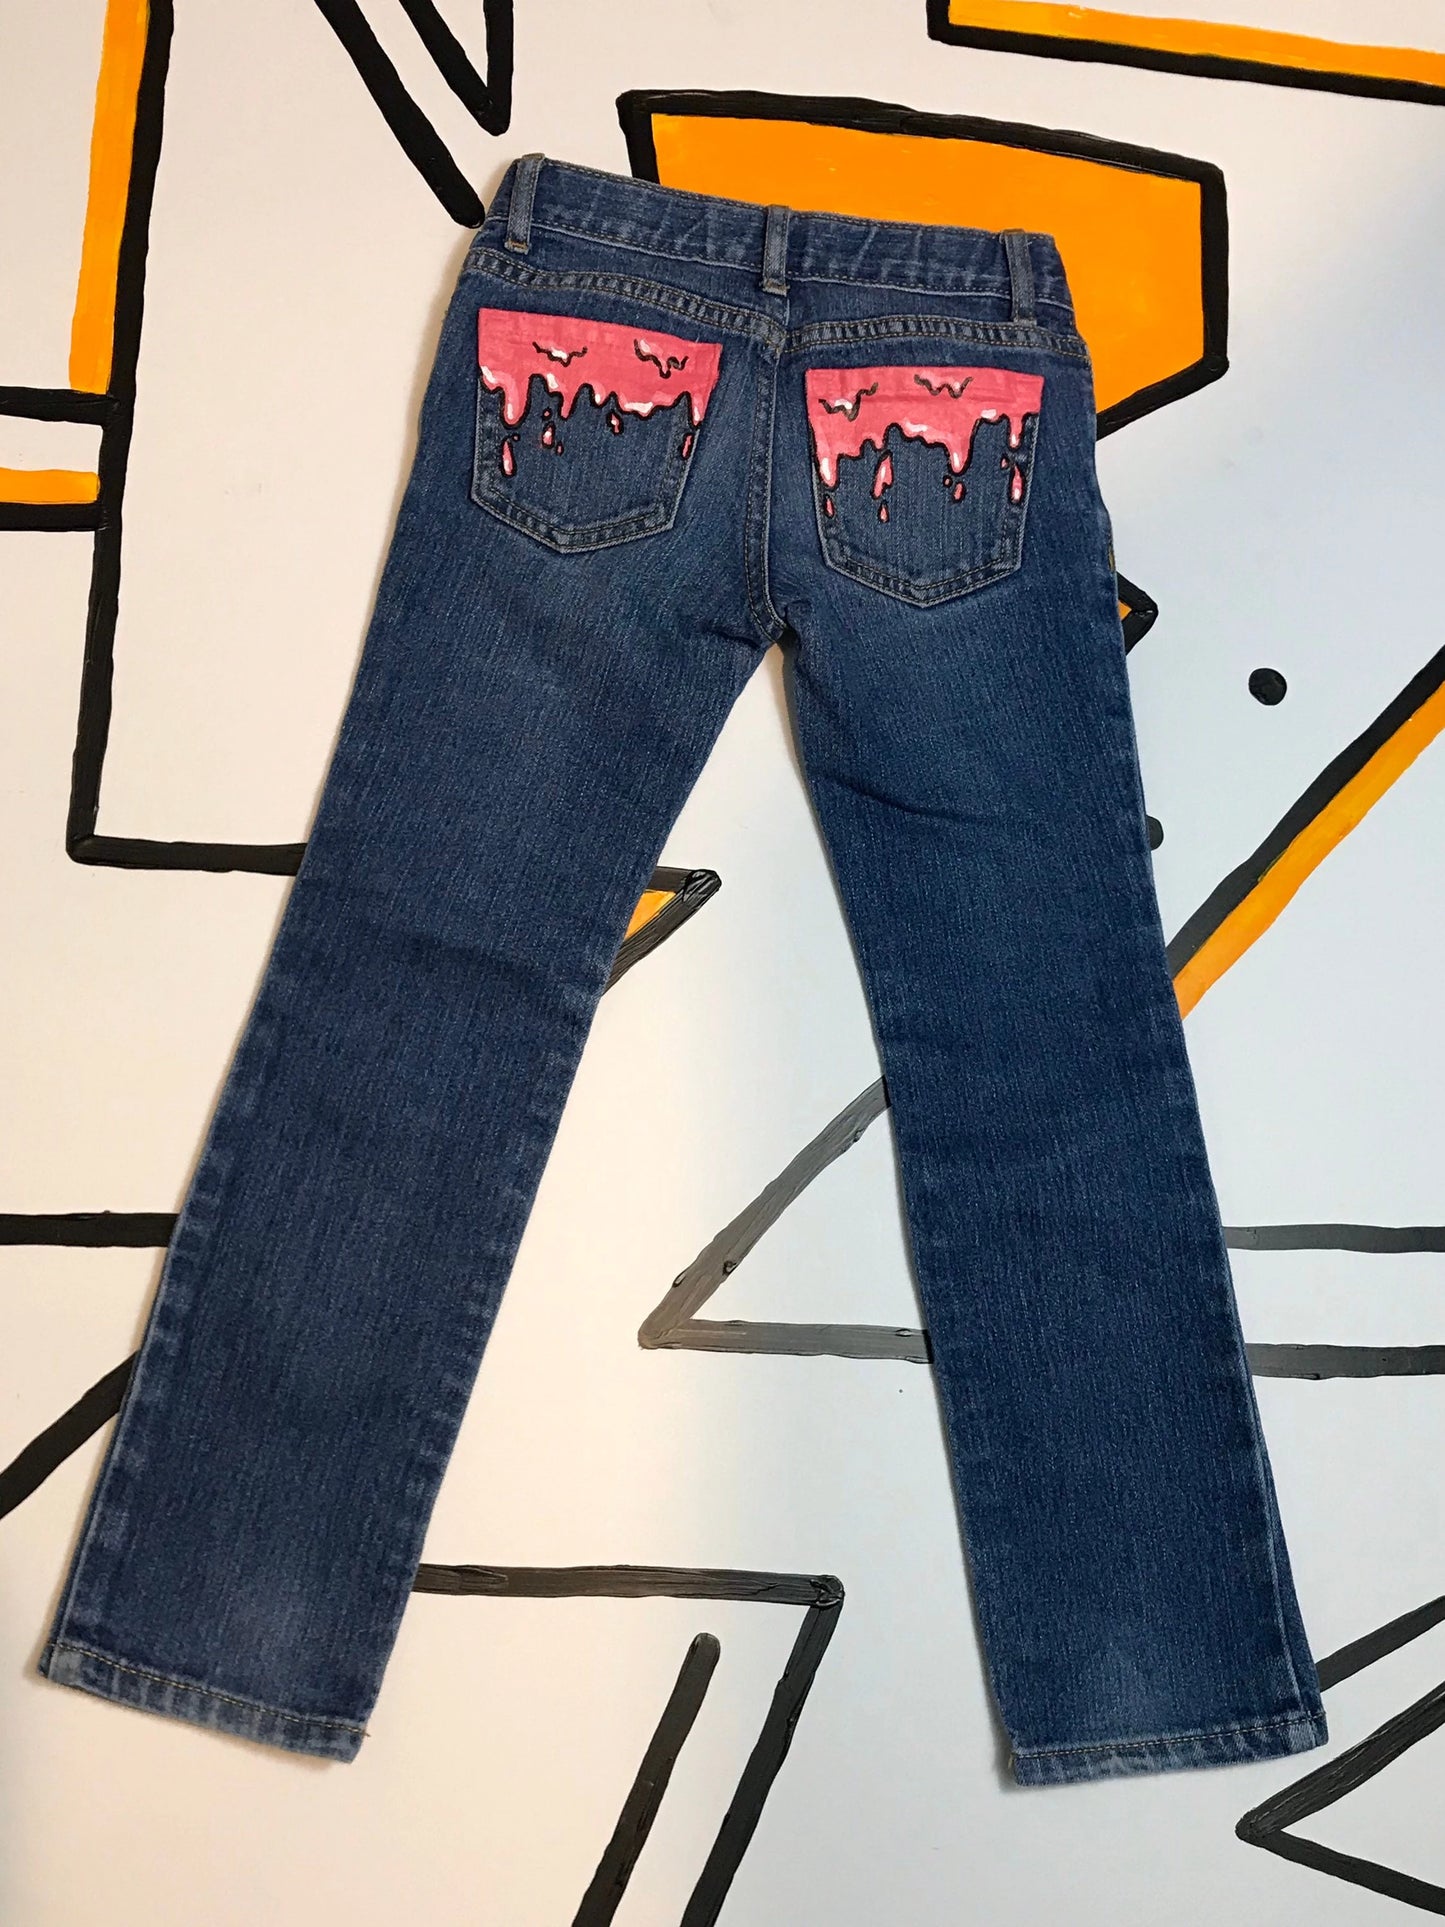 Girls Pink Drip Girls Size 6 Hand Painted Jeans